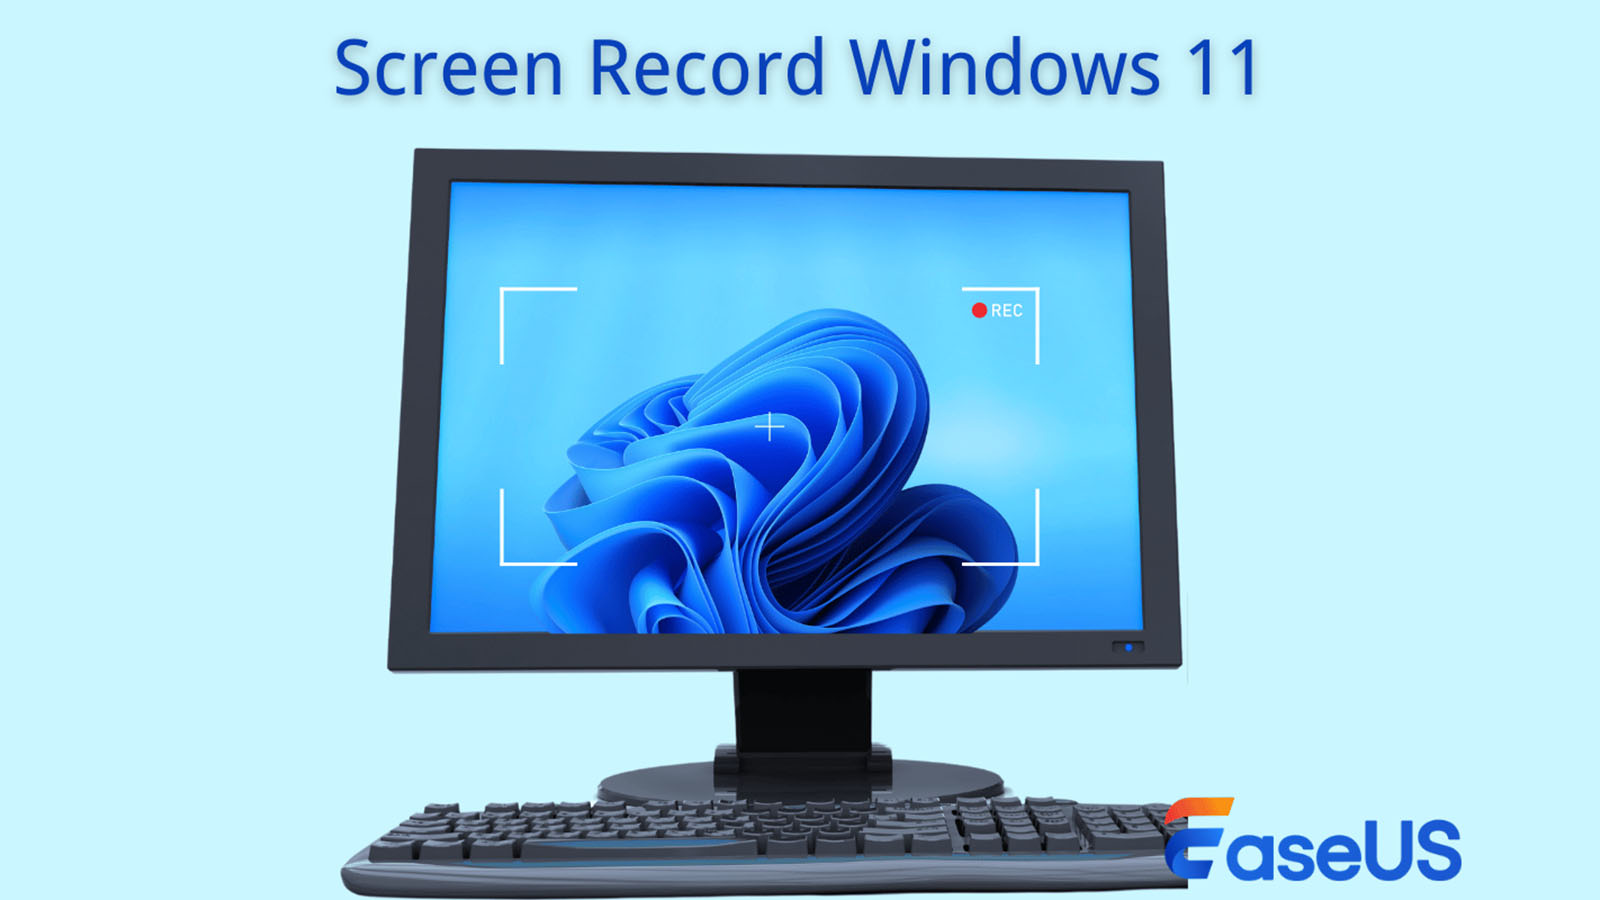 A PC screen showing a recording